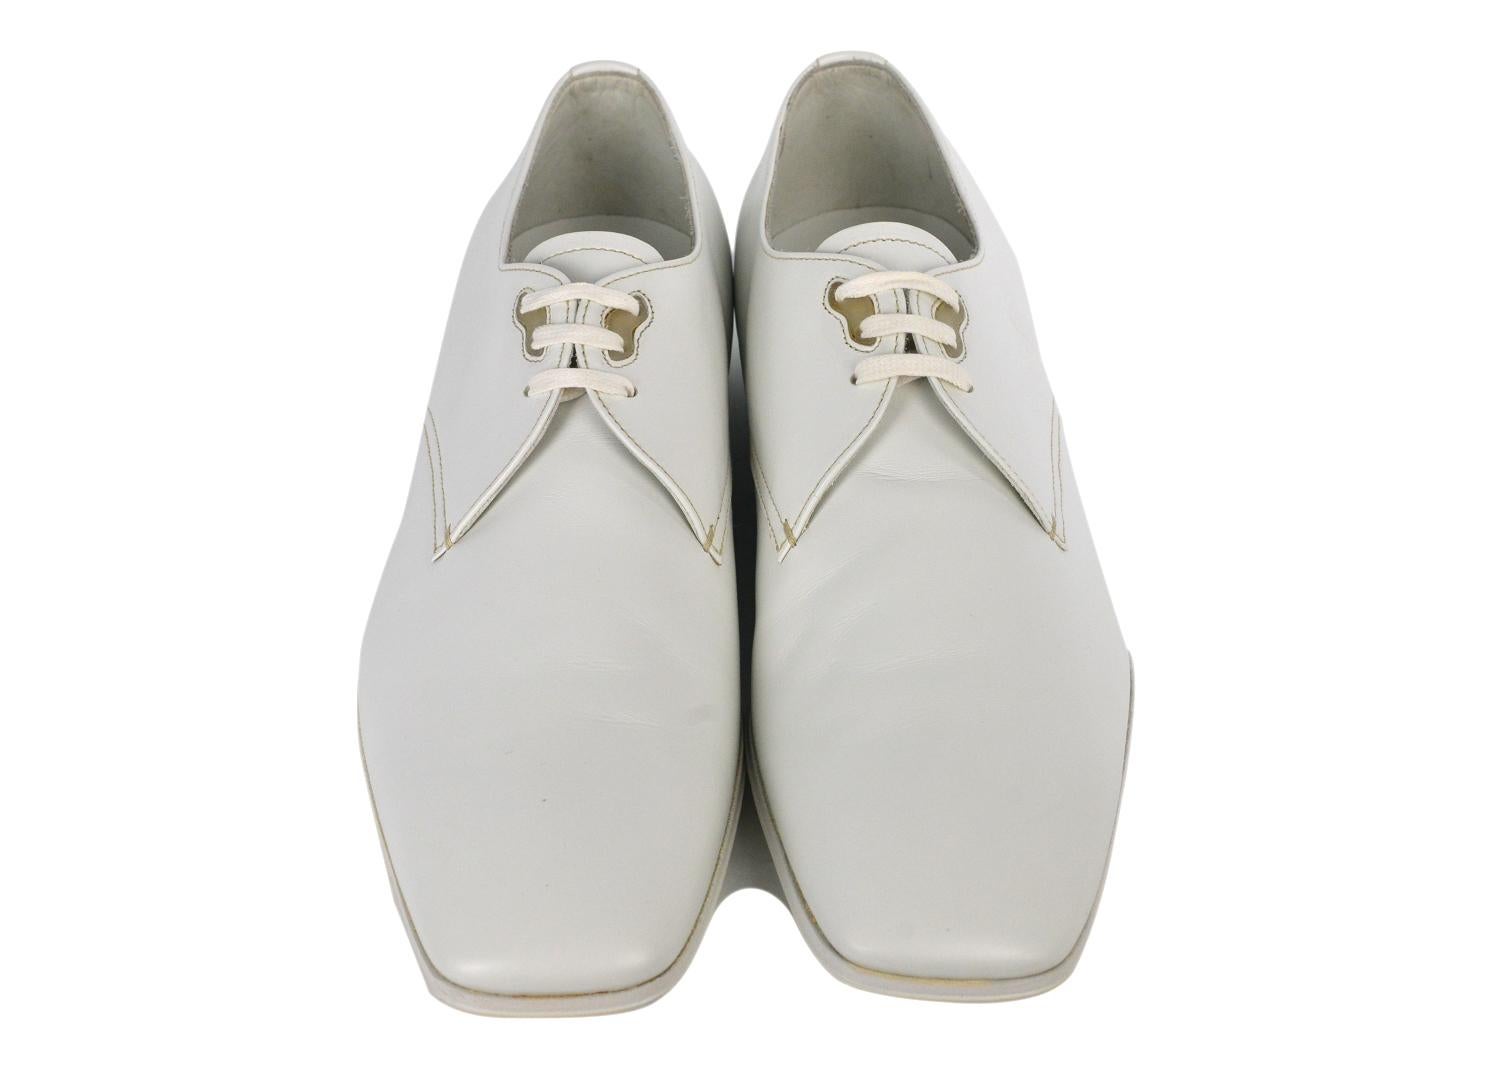 Prada Men's White Smooth Leather Lace Up Derby Luxury Shoes In New Condition For Sale In Brooklyn, NY